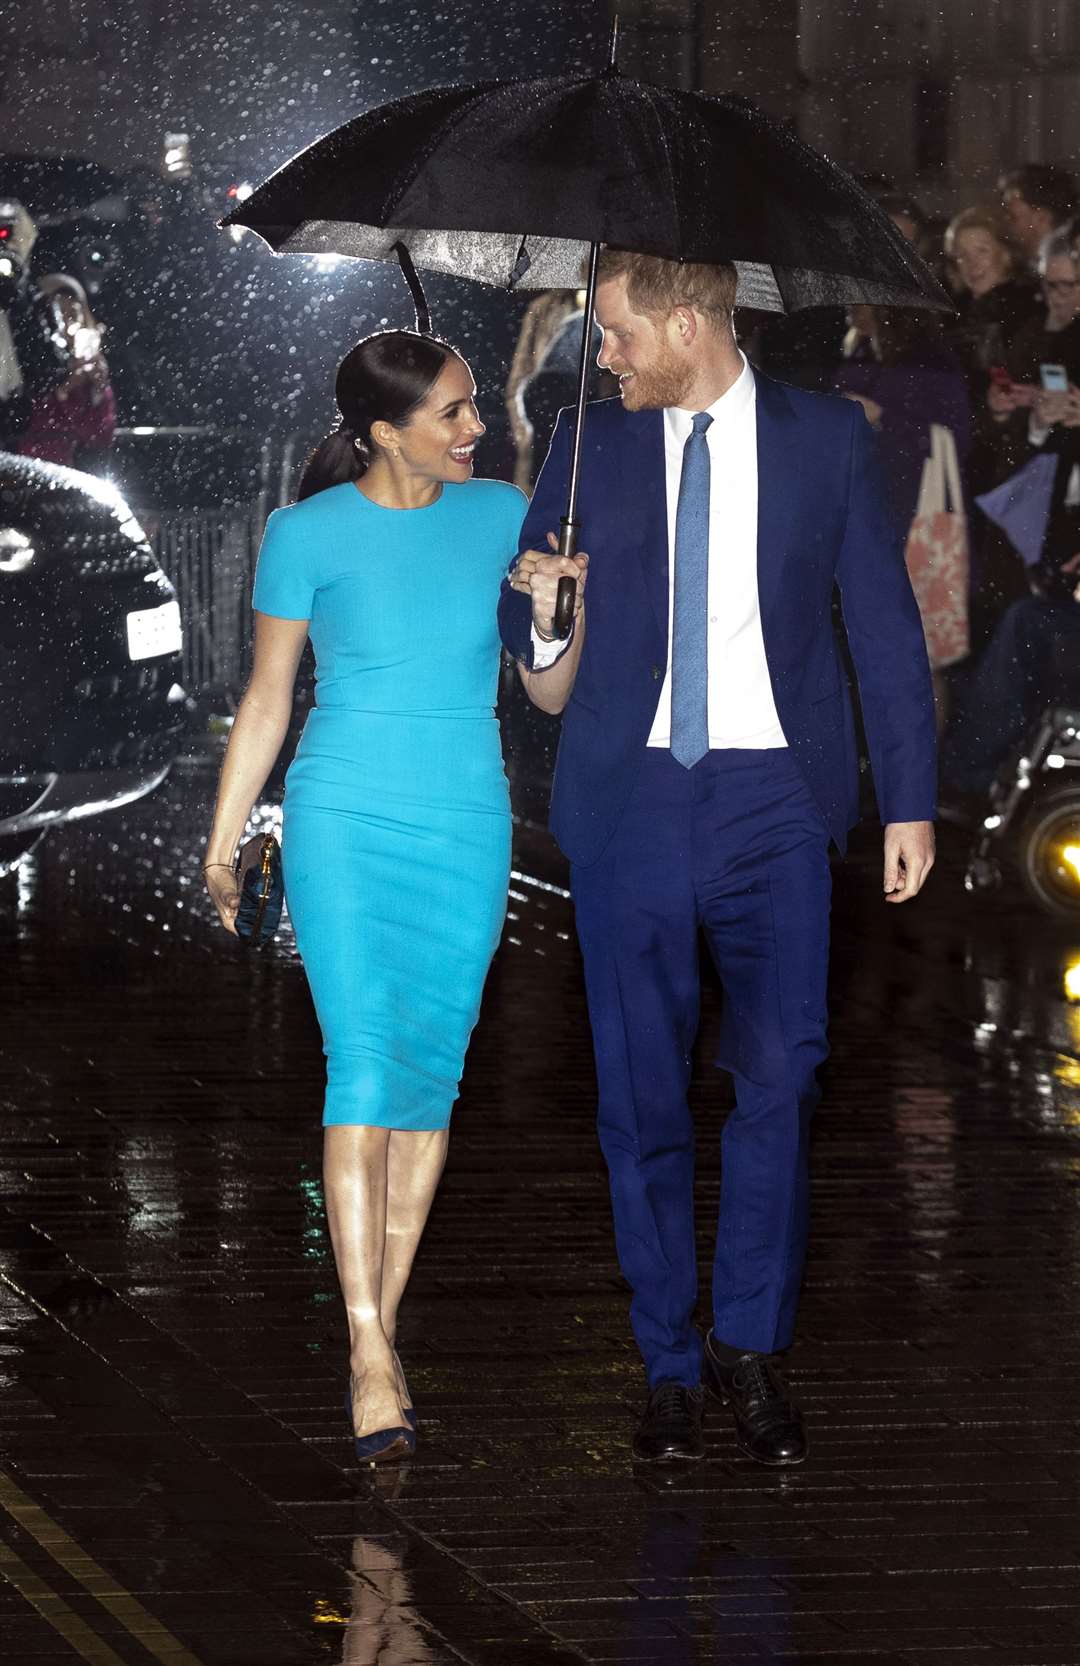 The Duke and Duchess of Sussex arrive at Mansion House in London to attend the Endeavour Fund Awards (PA)